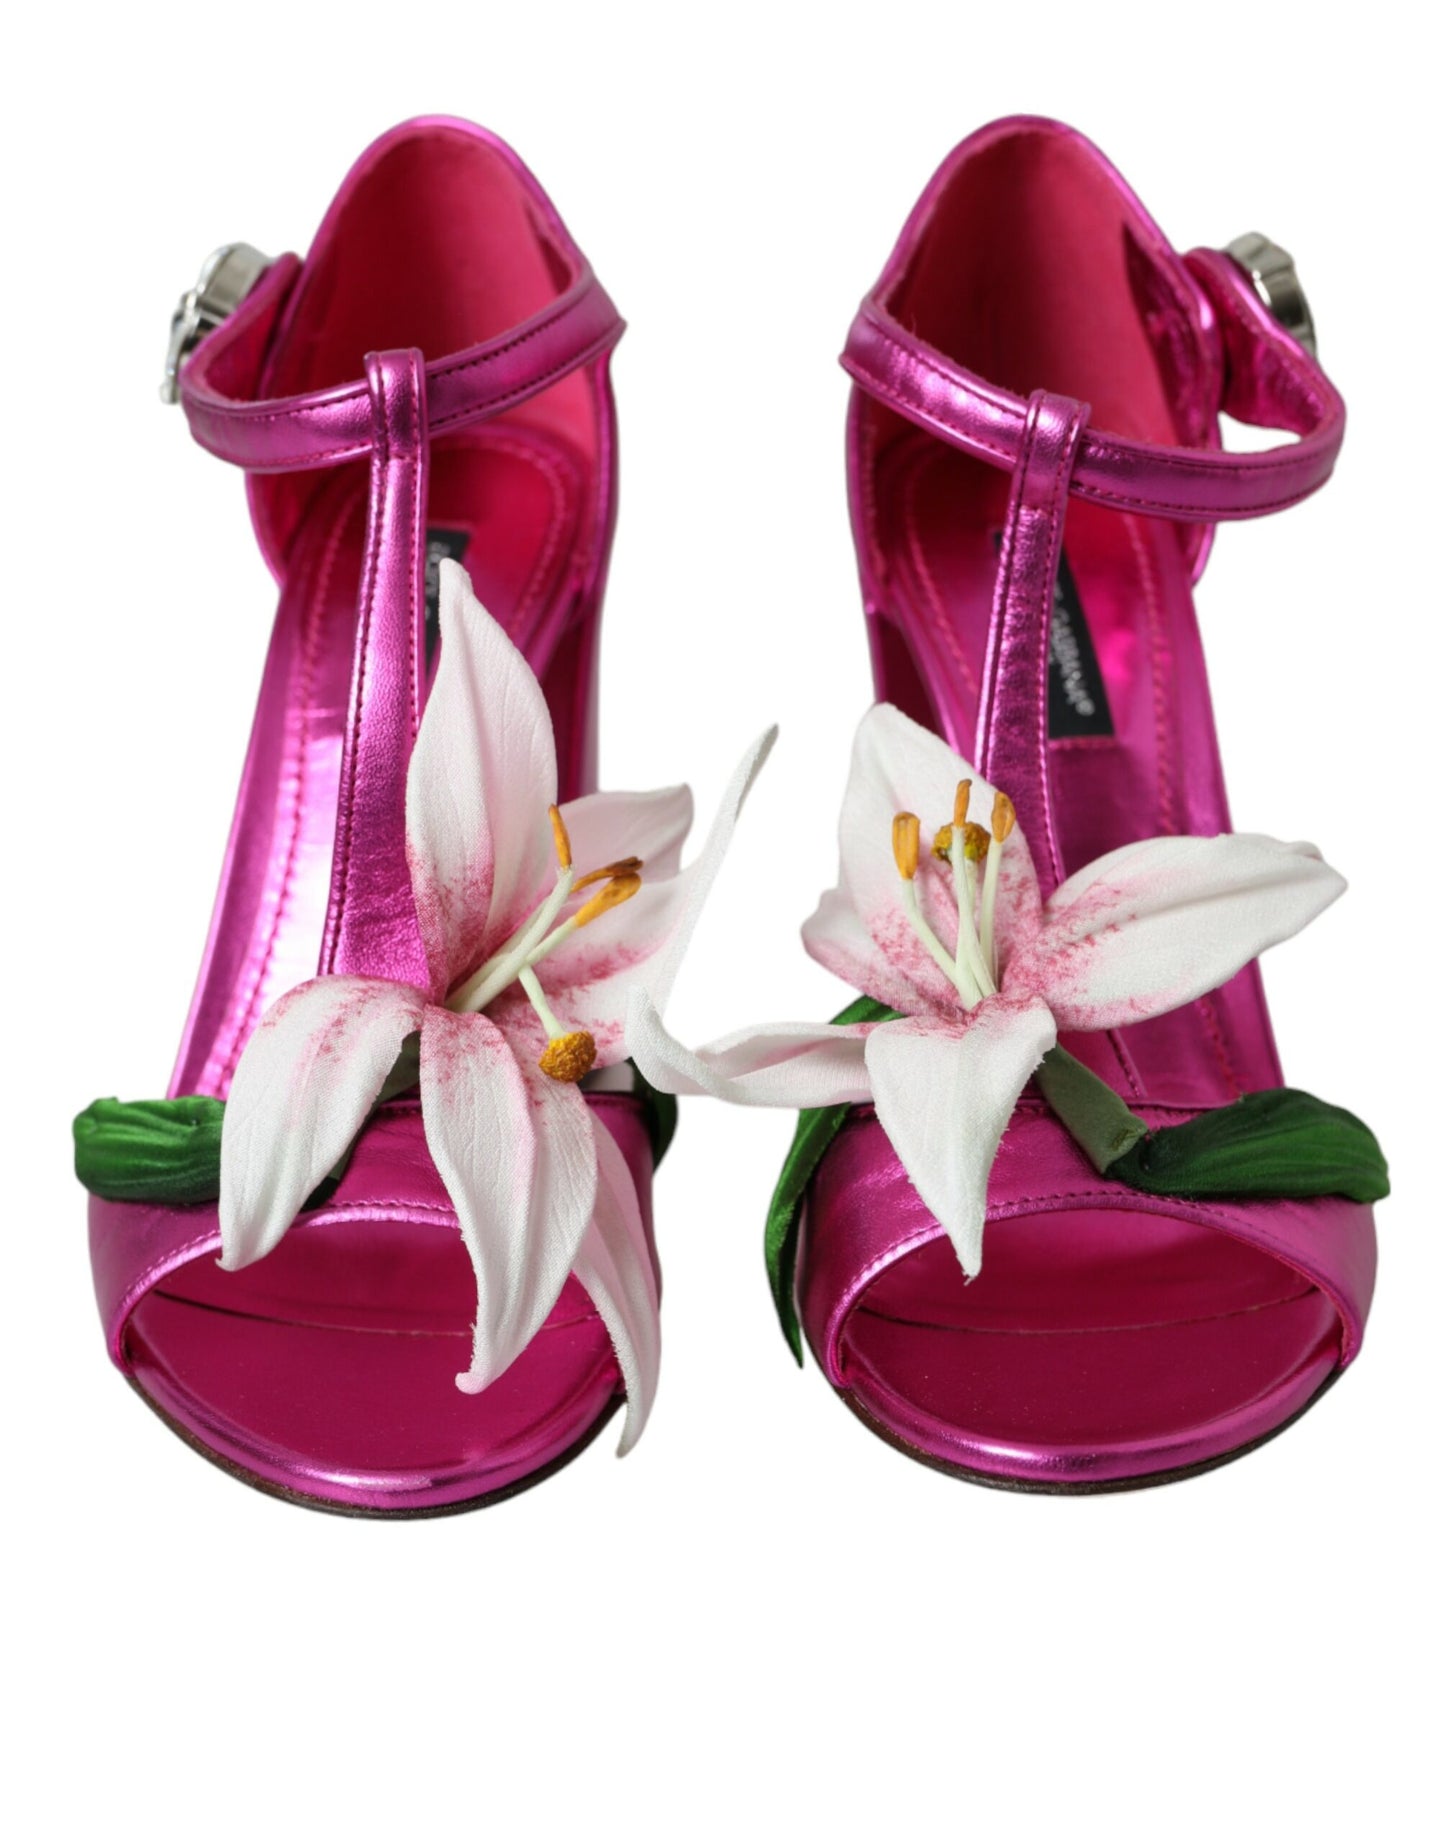 Dolce & Gabbana Pink Leather Crystals Floral Sandals Shoes